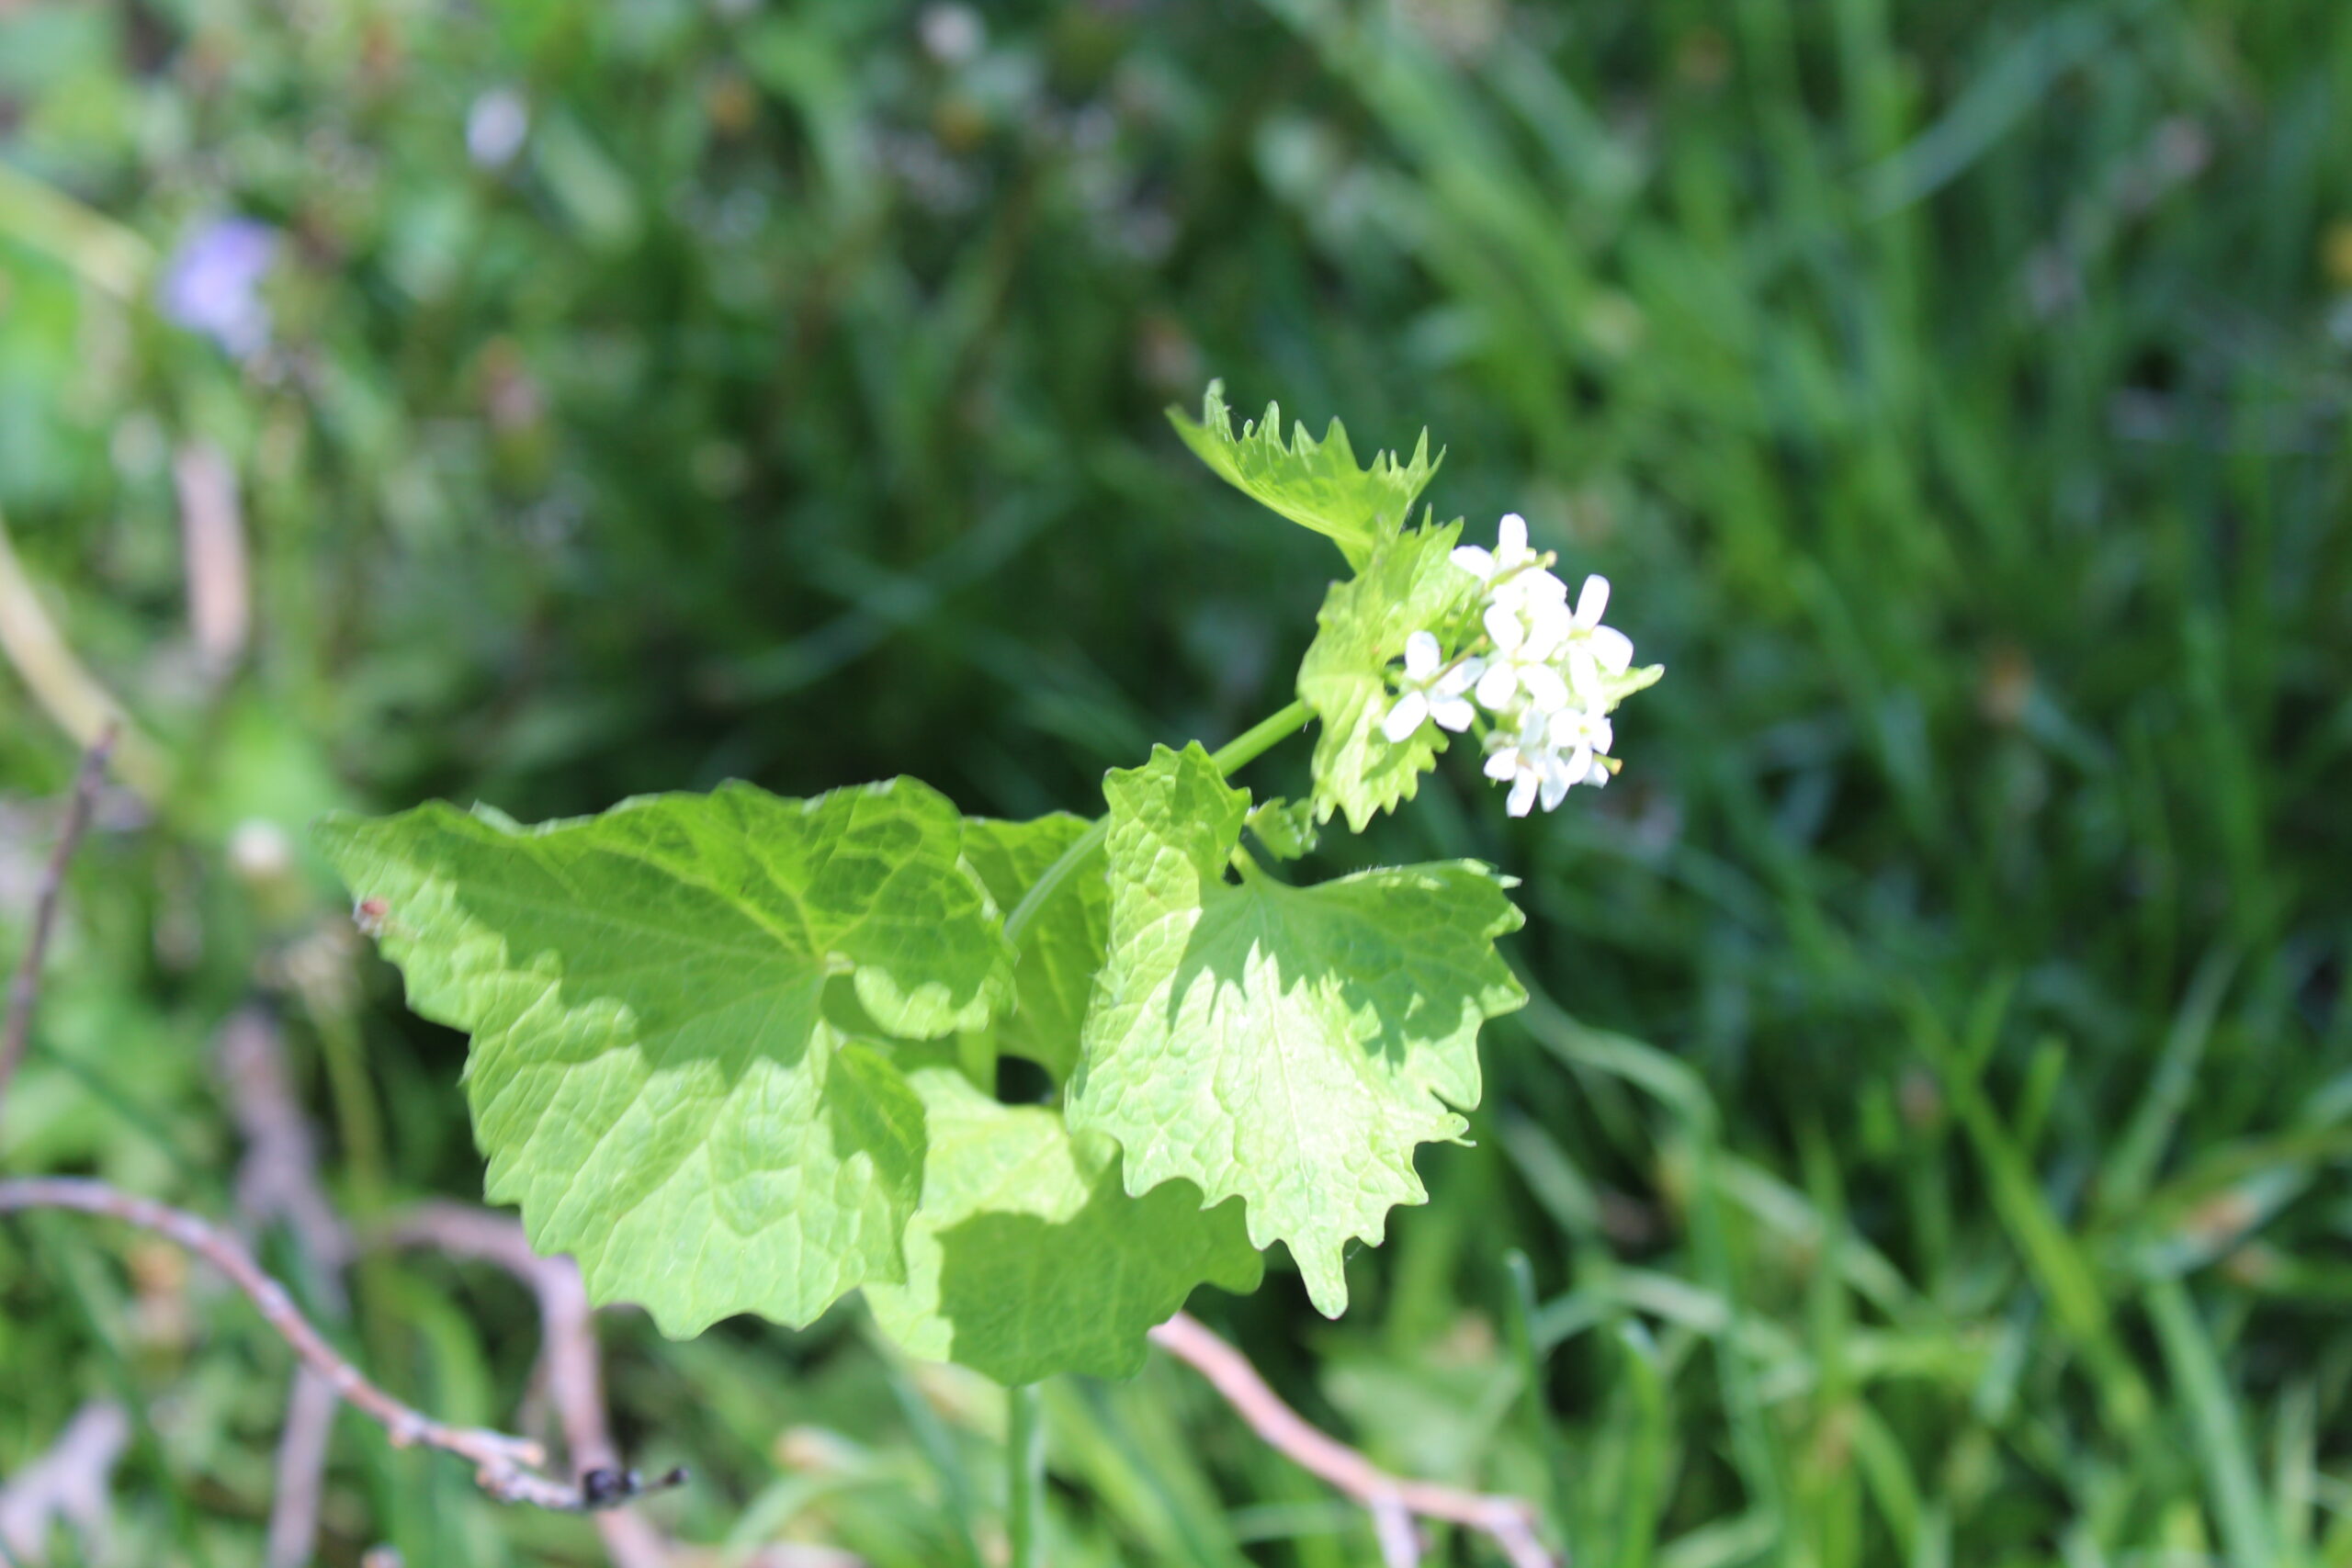 Tender leaves and delicate, white flowers of Garlic Mustard belie this aggressive invader's ambition of world domination.